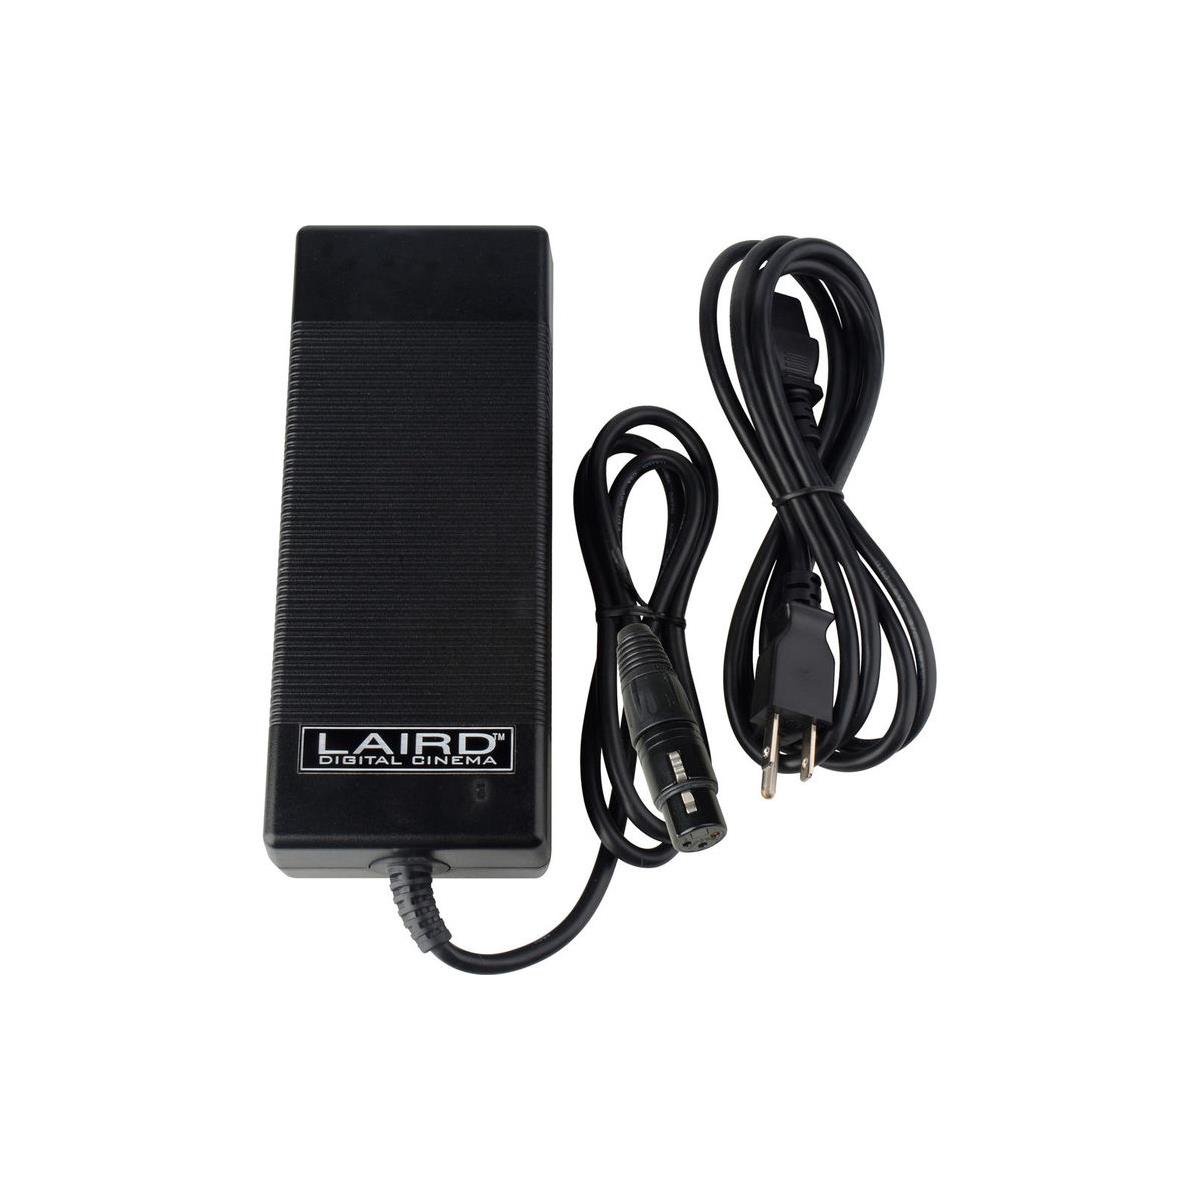 Image of Laird 24 VDC High Current Power Supply Source for 4K Cameras